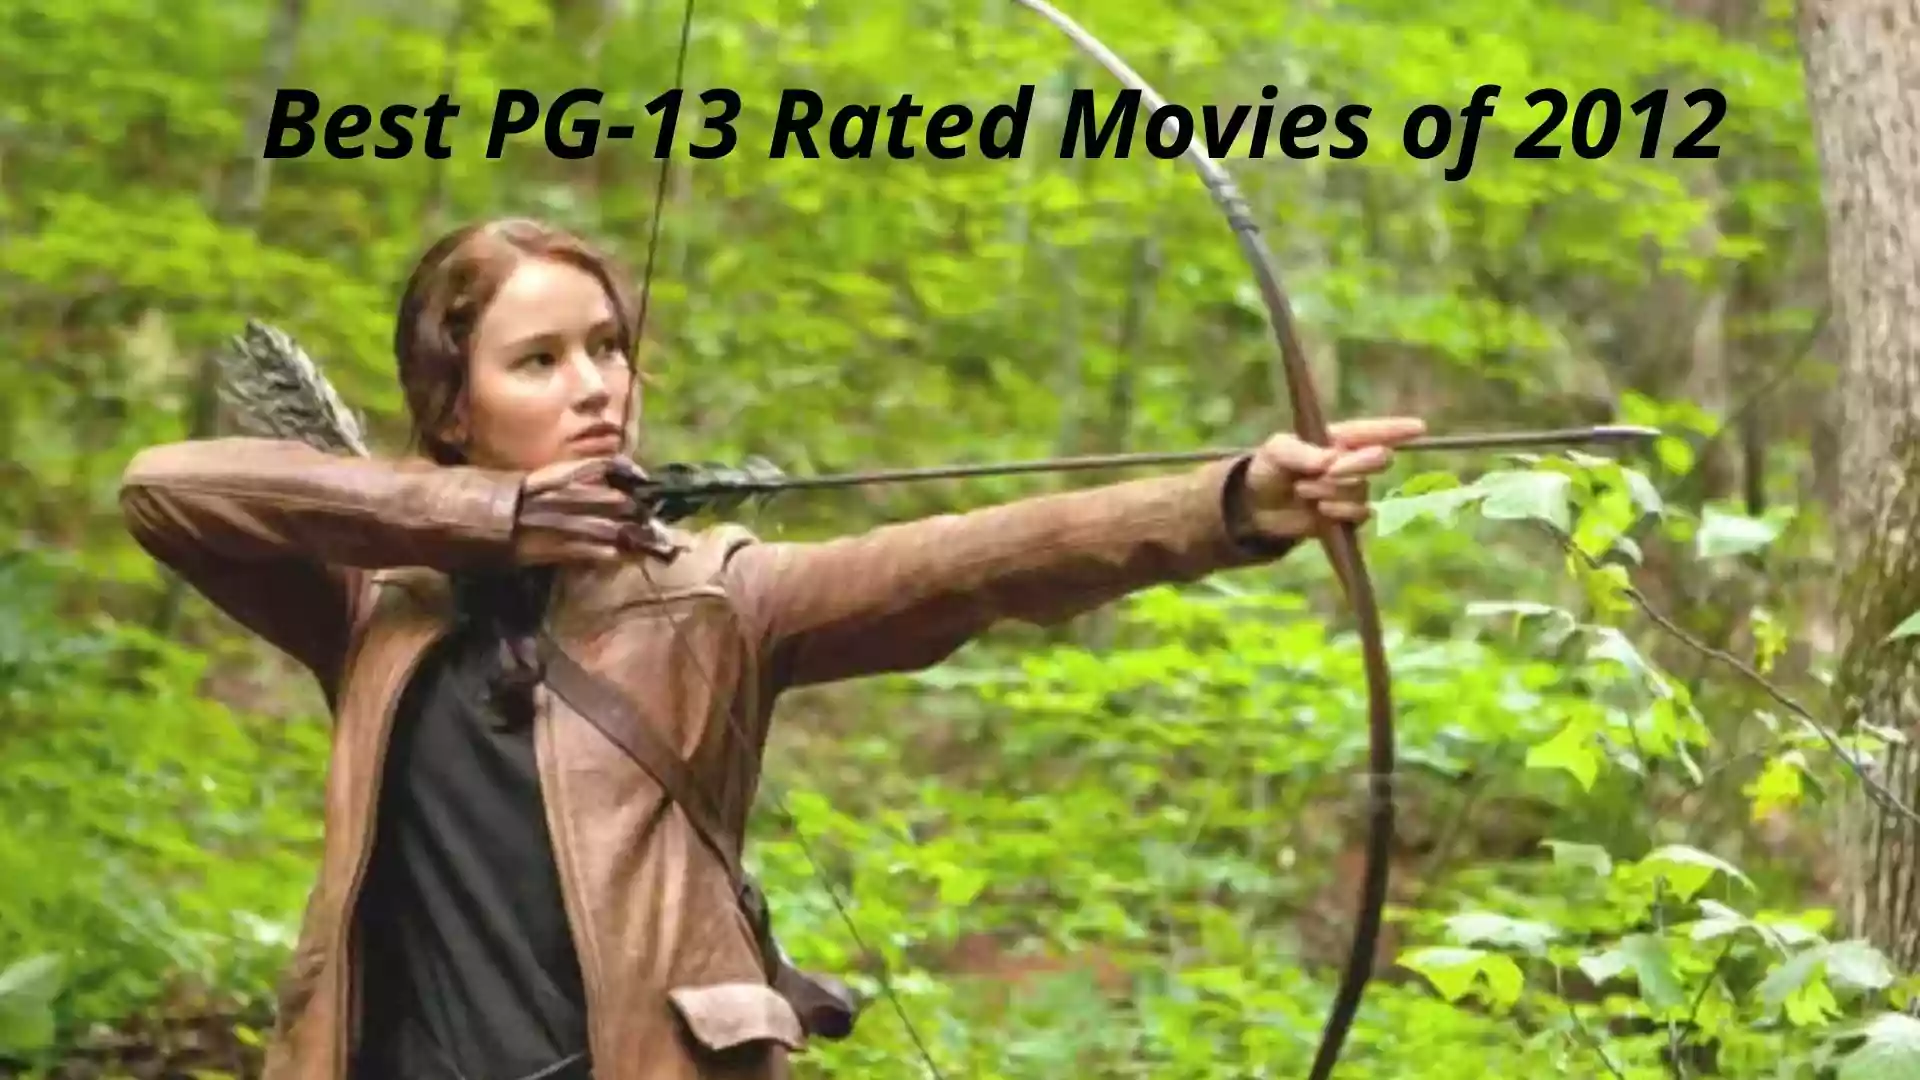 Best PG-13 Rated Movies of 2012